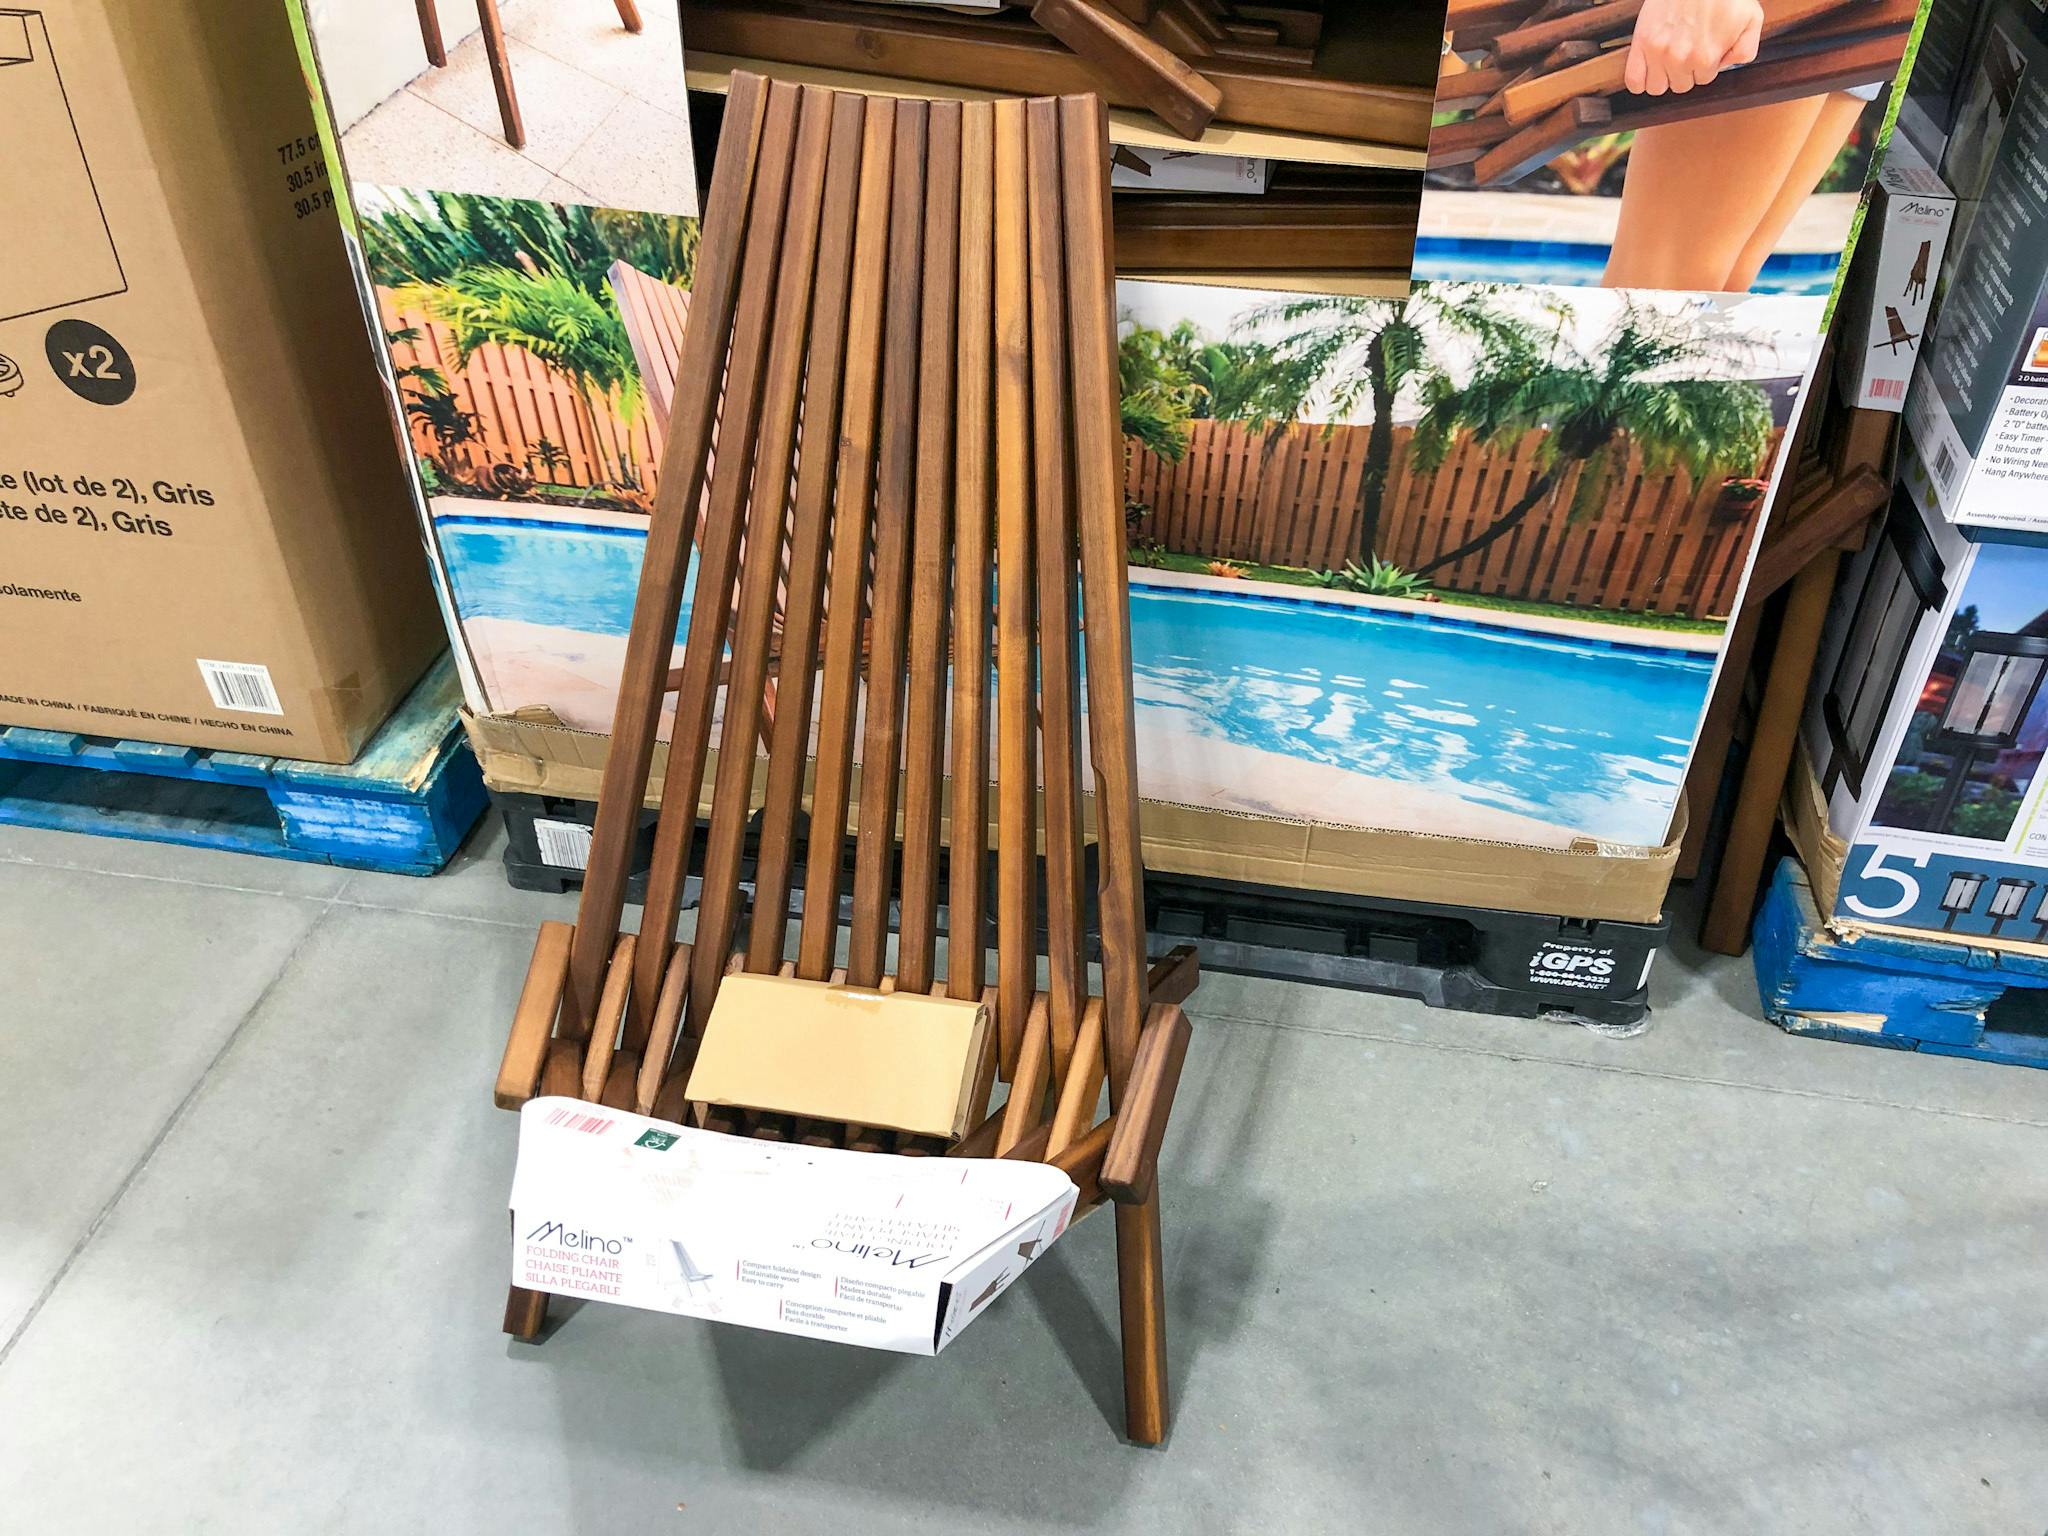 Melino Chairs - $49.99 at Costco - The Krazy Coupon Lady